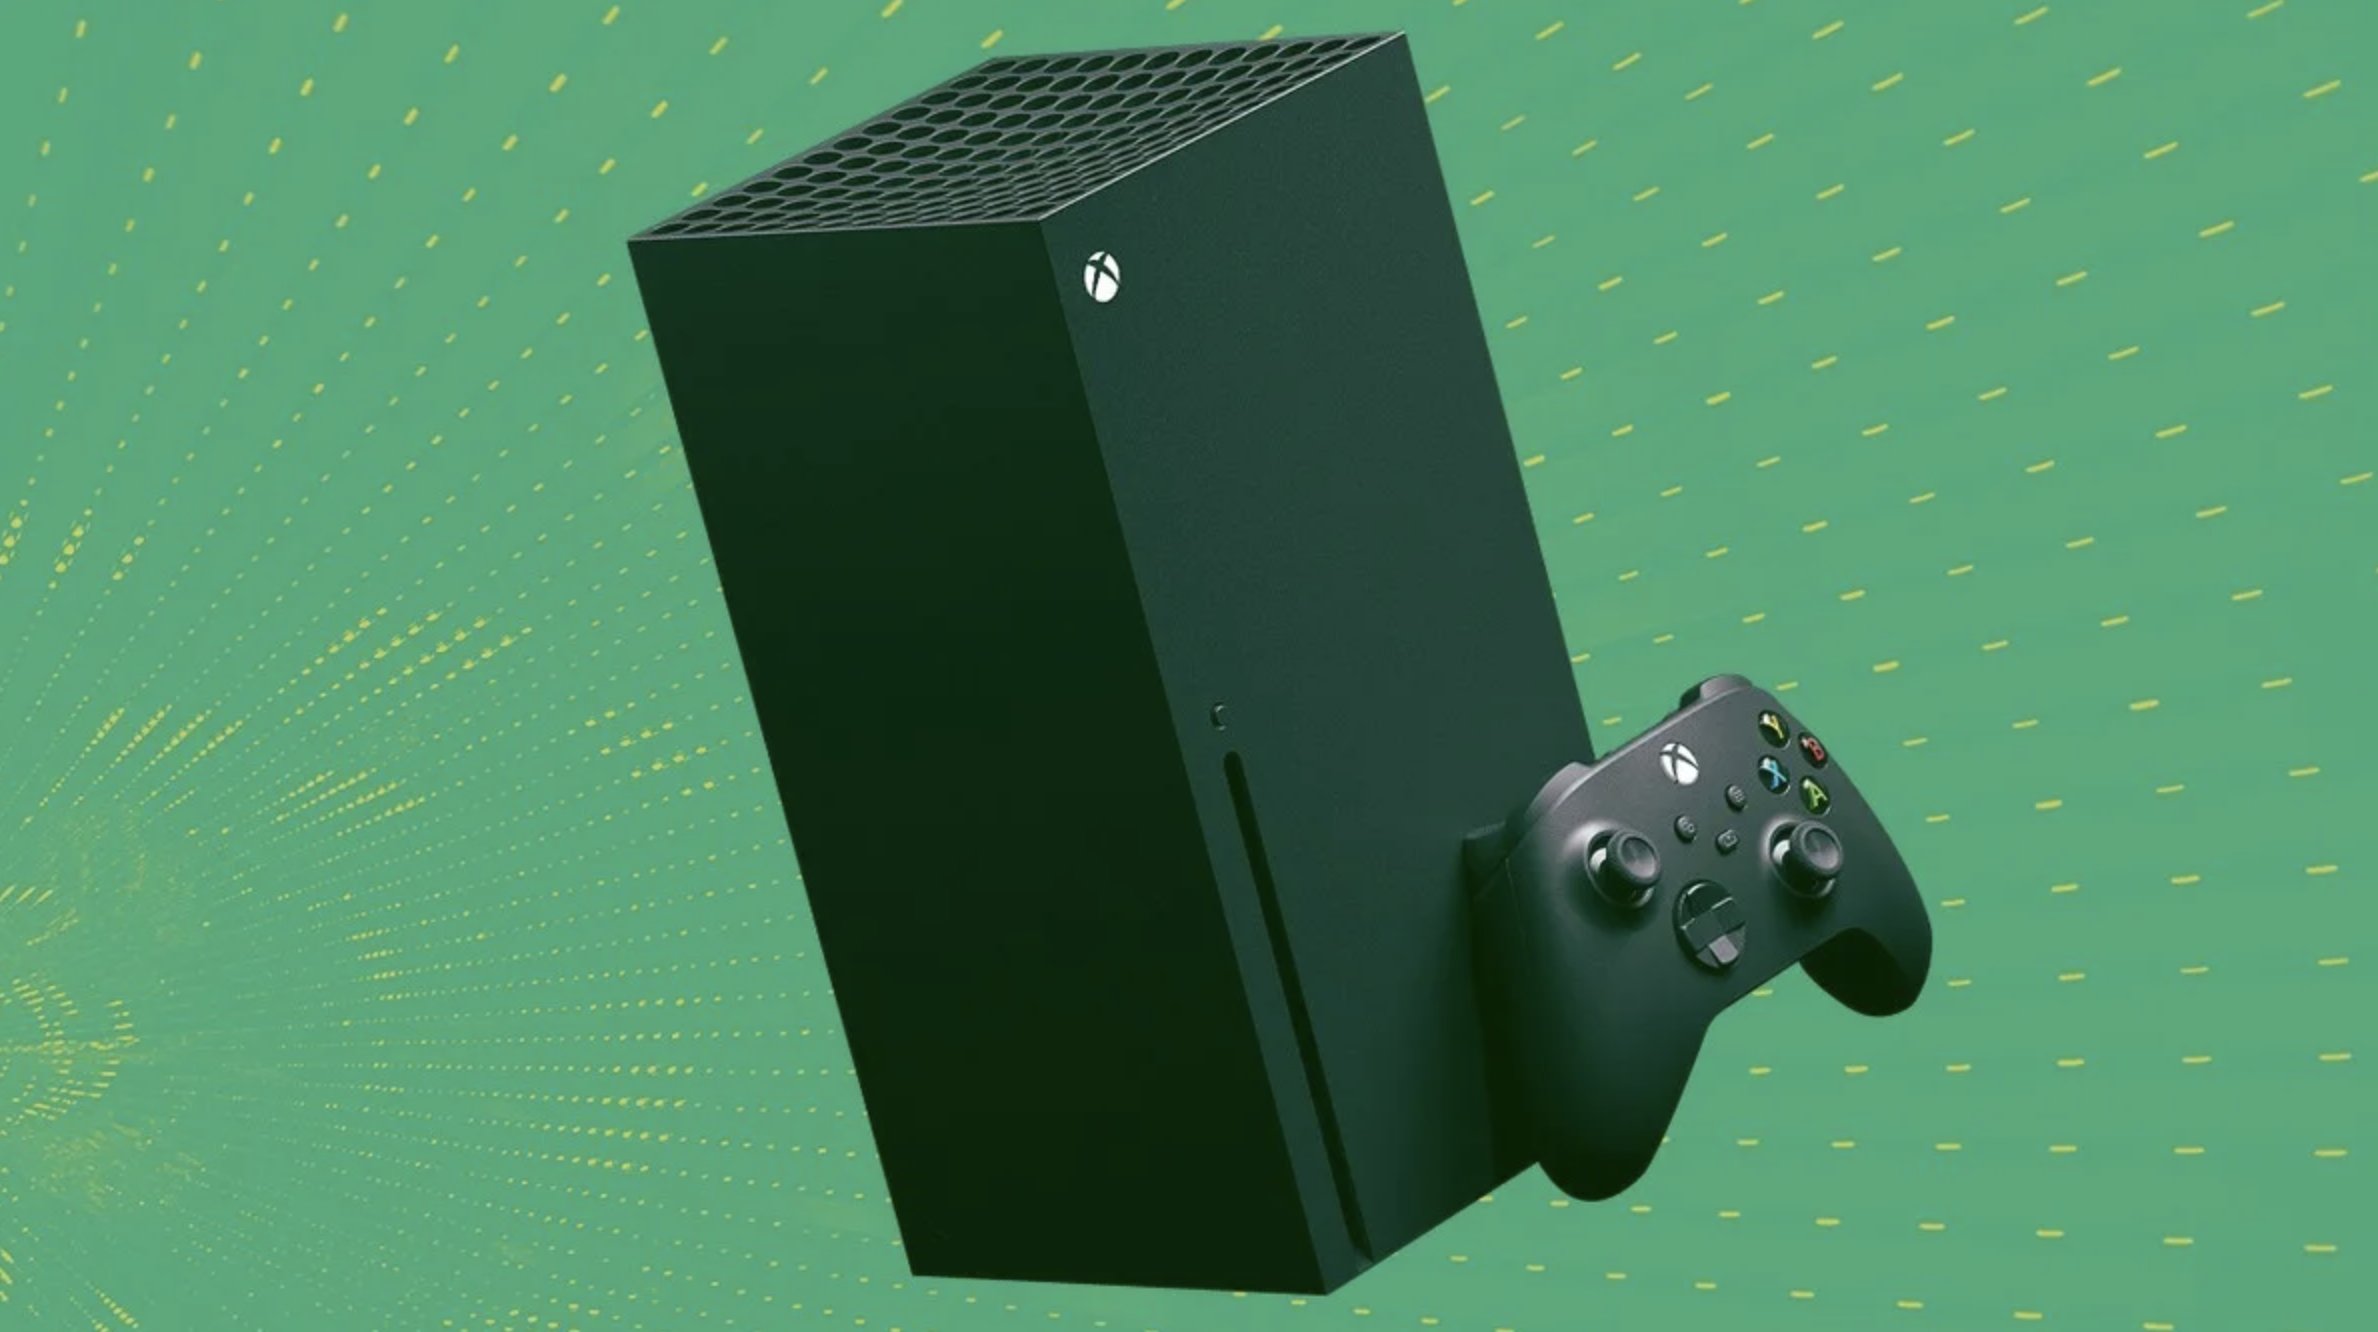 combinatie zak deken IGN on Twitter: "The Xbox Series X and Xbox Series S will allegedly both  launch on November 10, 2020, and will cost $499 and $299.  https://t.co/BngINlftzH https://t.co/fztat1DxJa" / Twitter